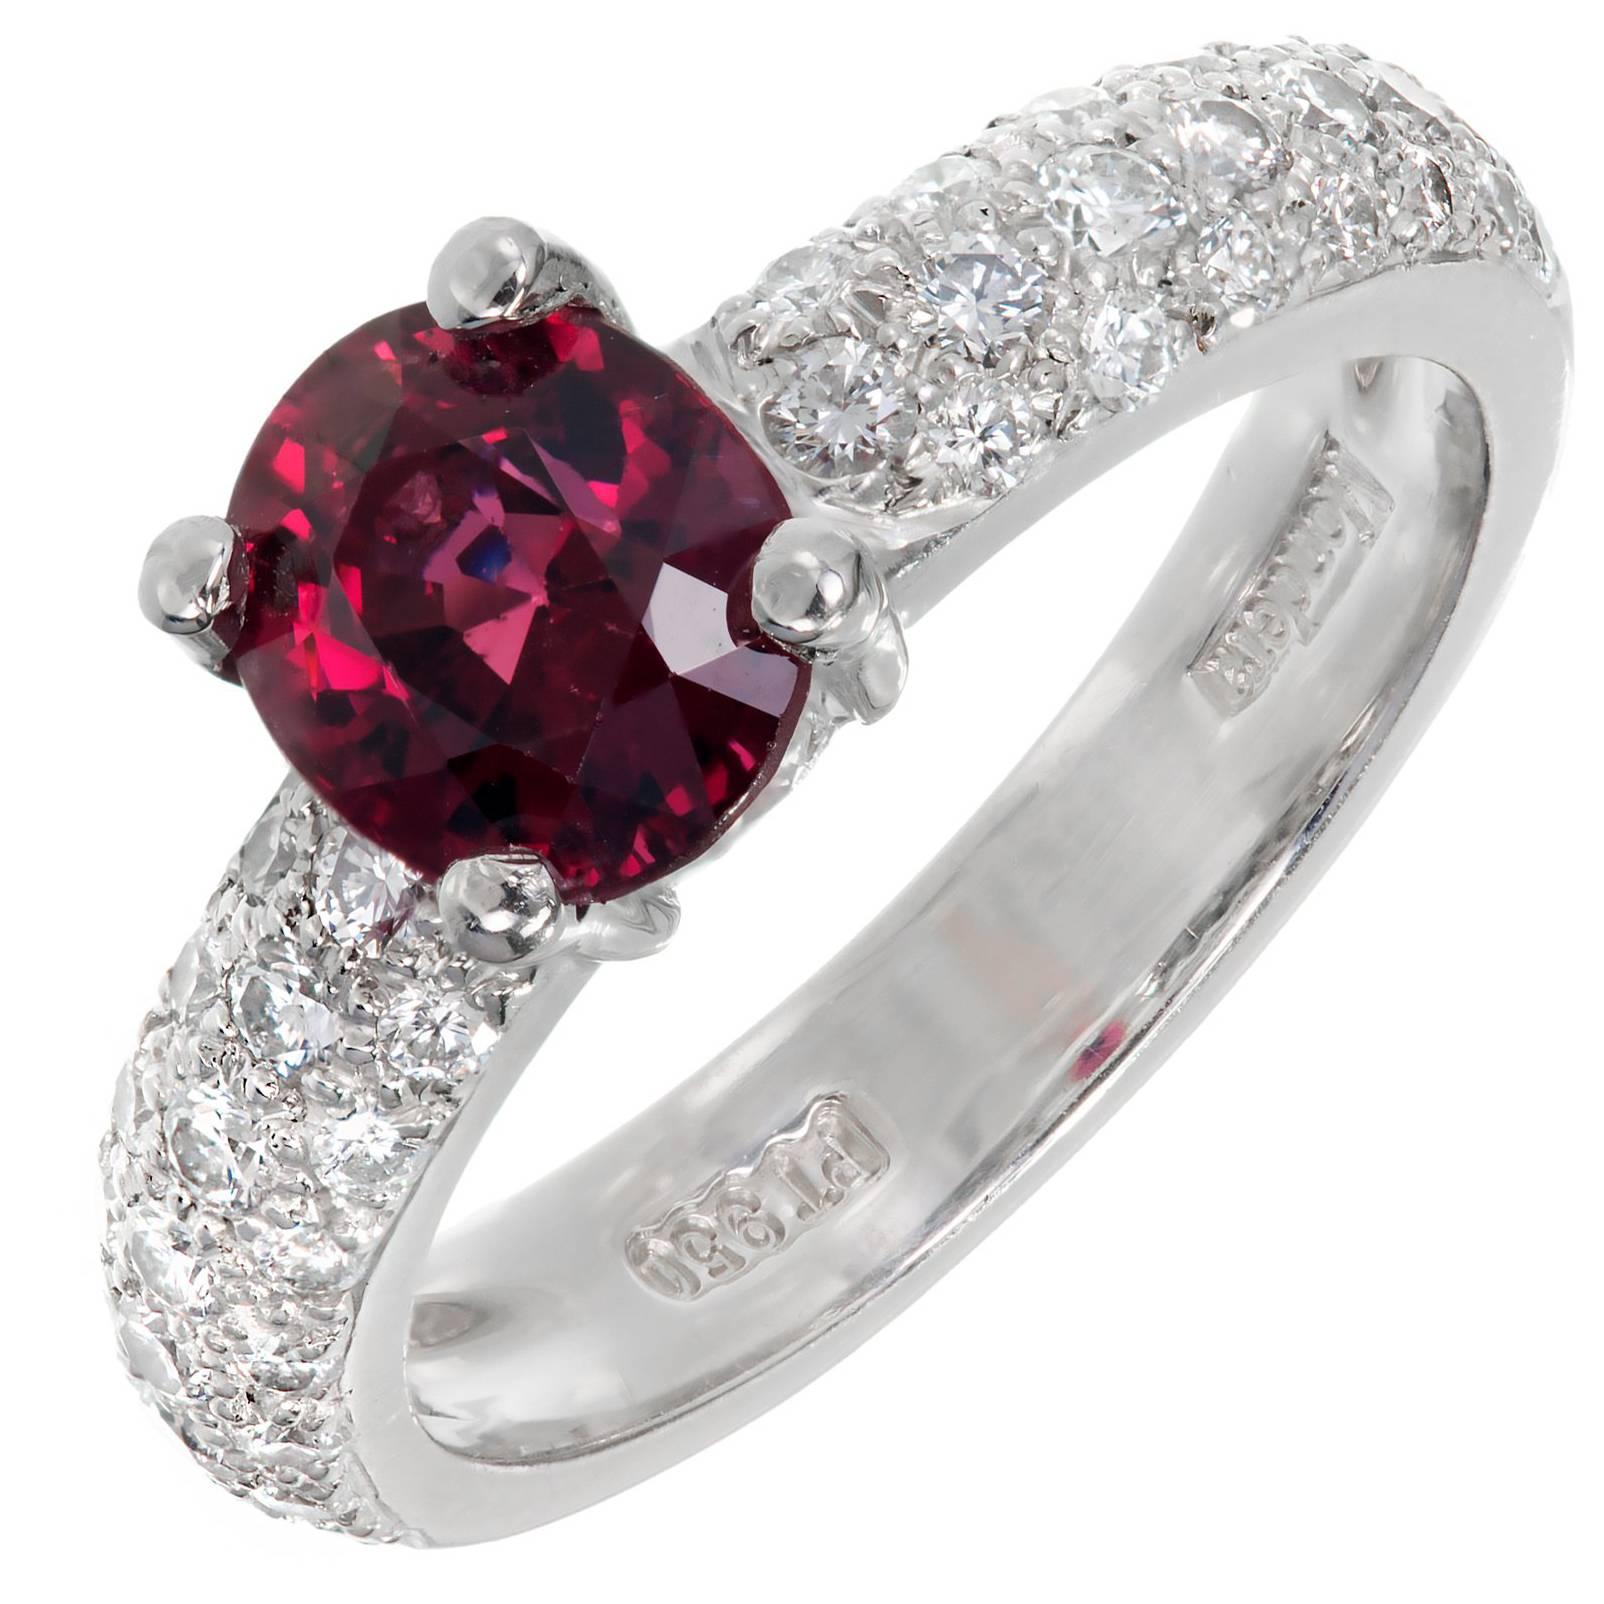 Mondera GIA Certified 1.59 Carat Red Spinel Diamond Platinum Engagement Ring For Sale